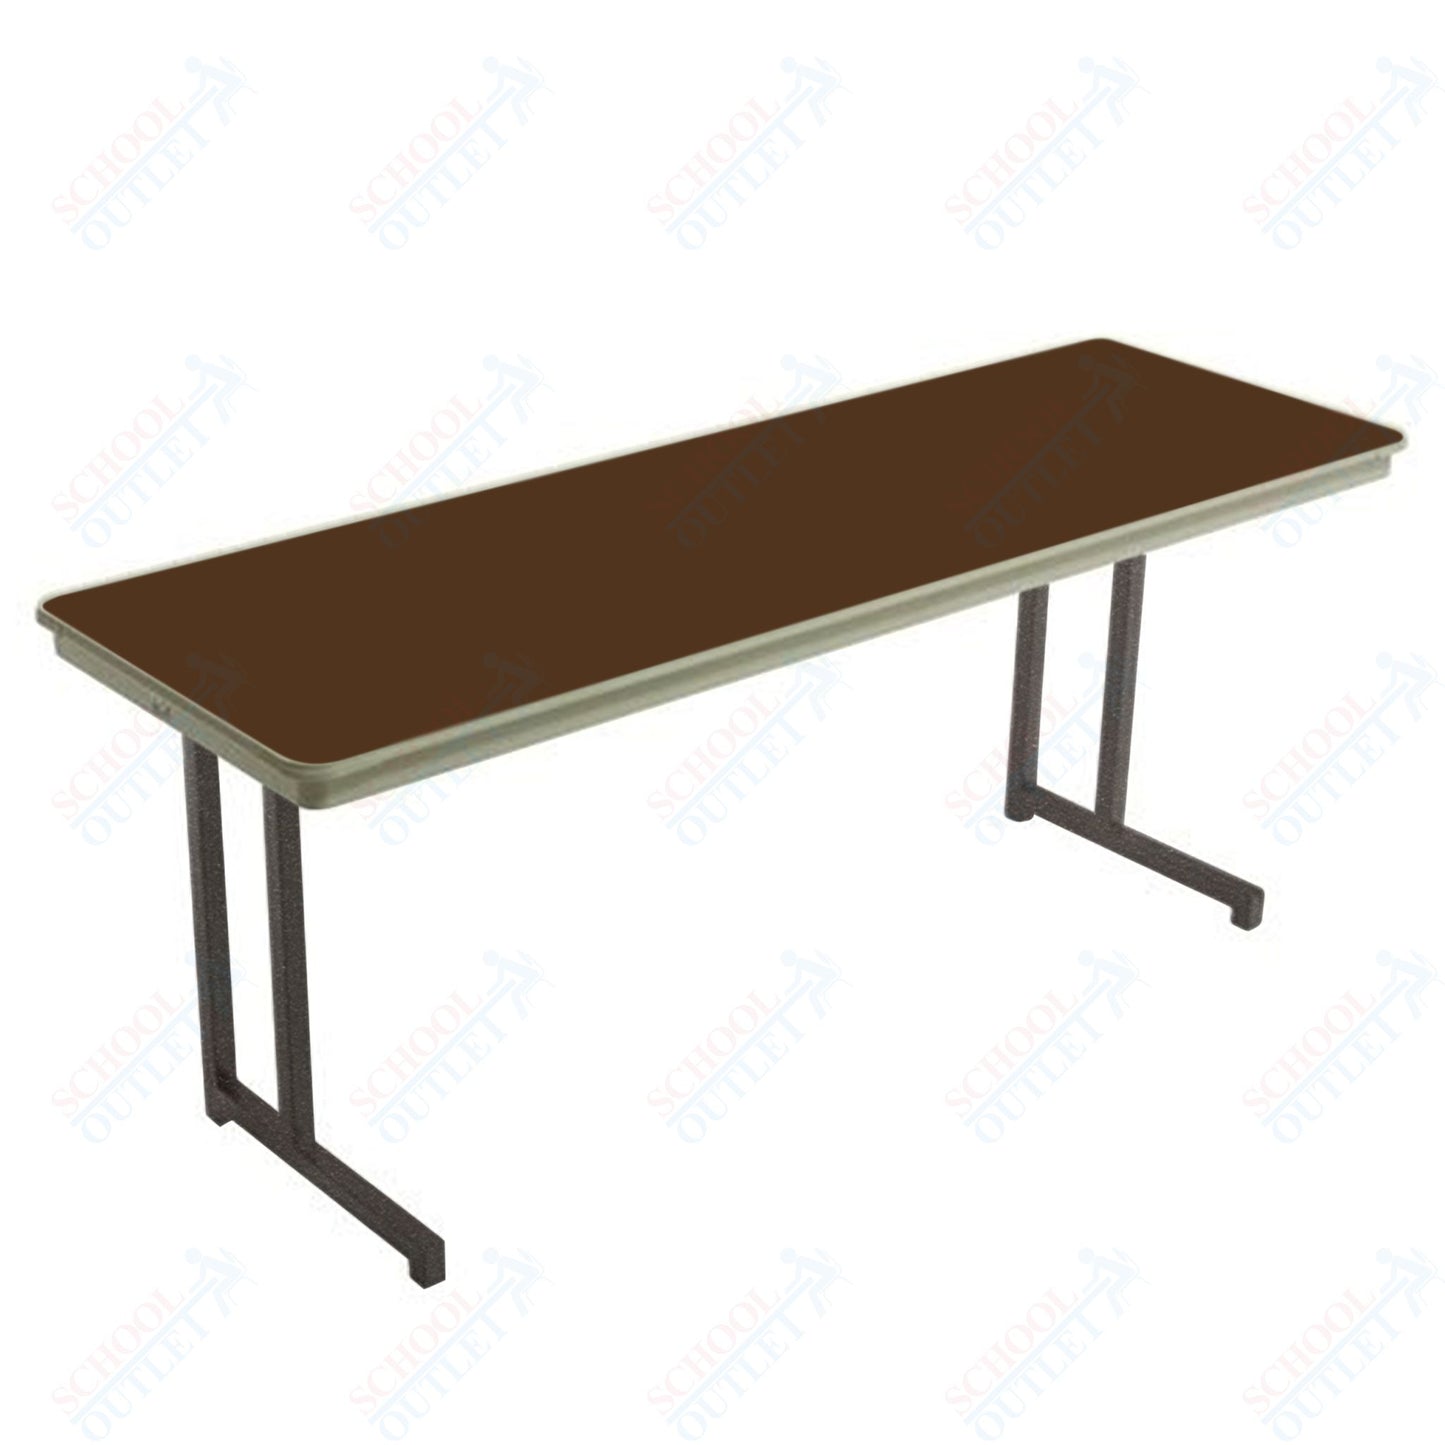 AmTab Dynalite Featherweight Heavy - Duty ABS Plastic Training Table - Rectangle - 18"W x 60"L x 29"H (AmTab AMT - TT185DL) - SchoolOutlet